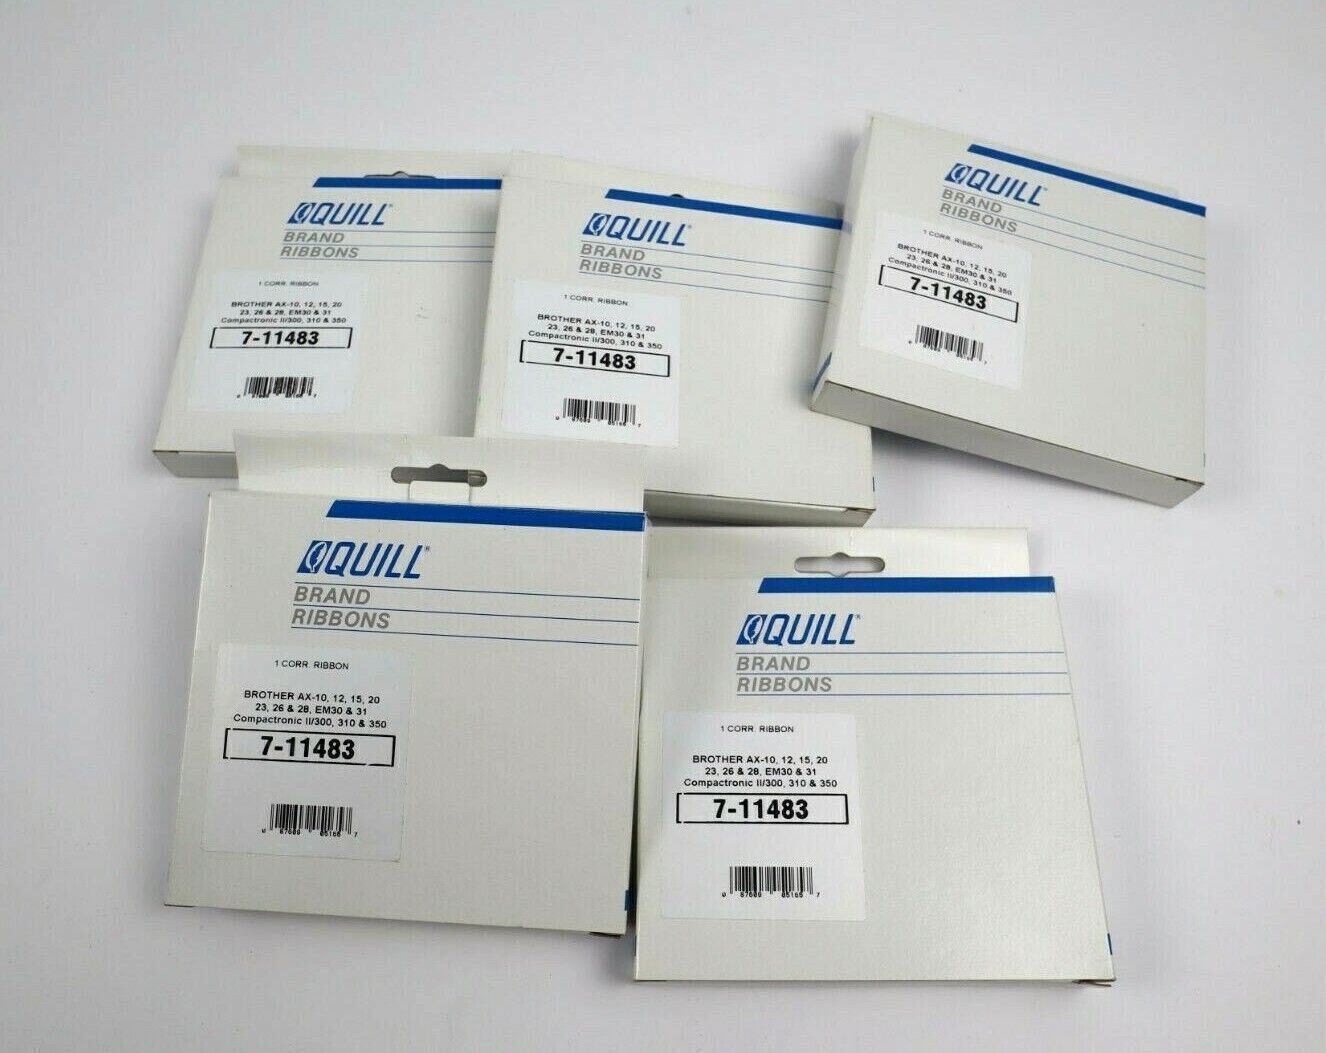 5 PACK Quill Brand Ribbons For Brother Corrective Ribbon 7-11483 NEW